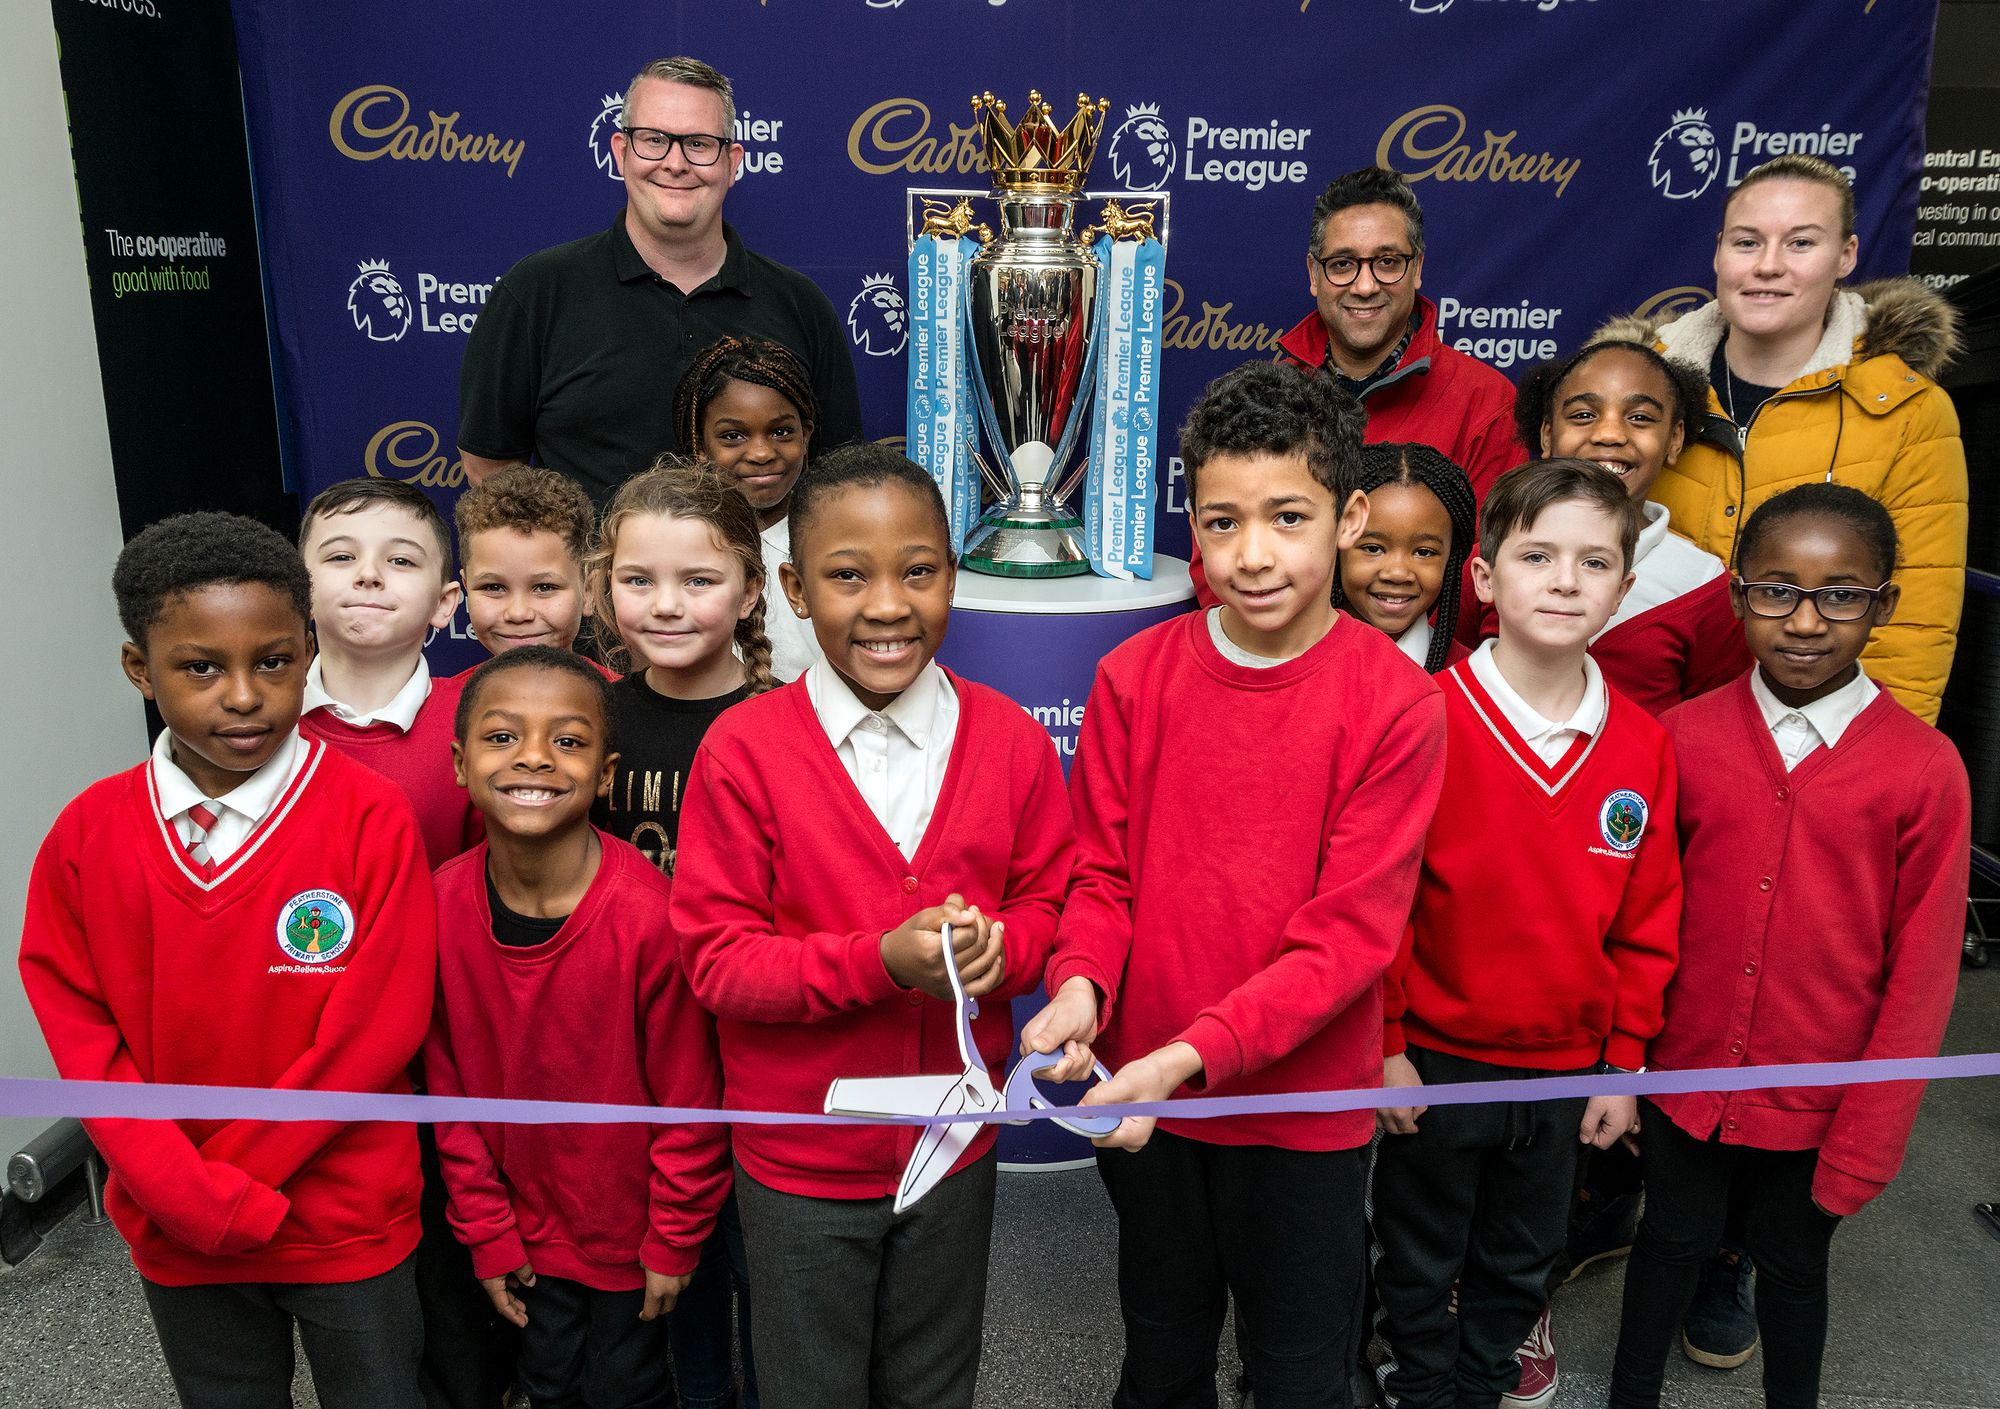 The Premier League comes to Birmingham thanks to Central England Co-operative